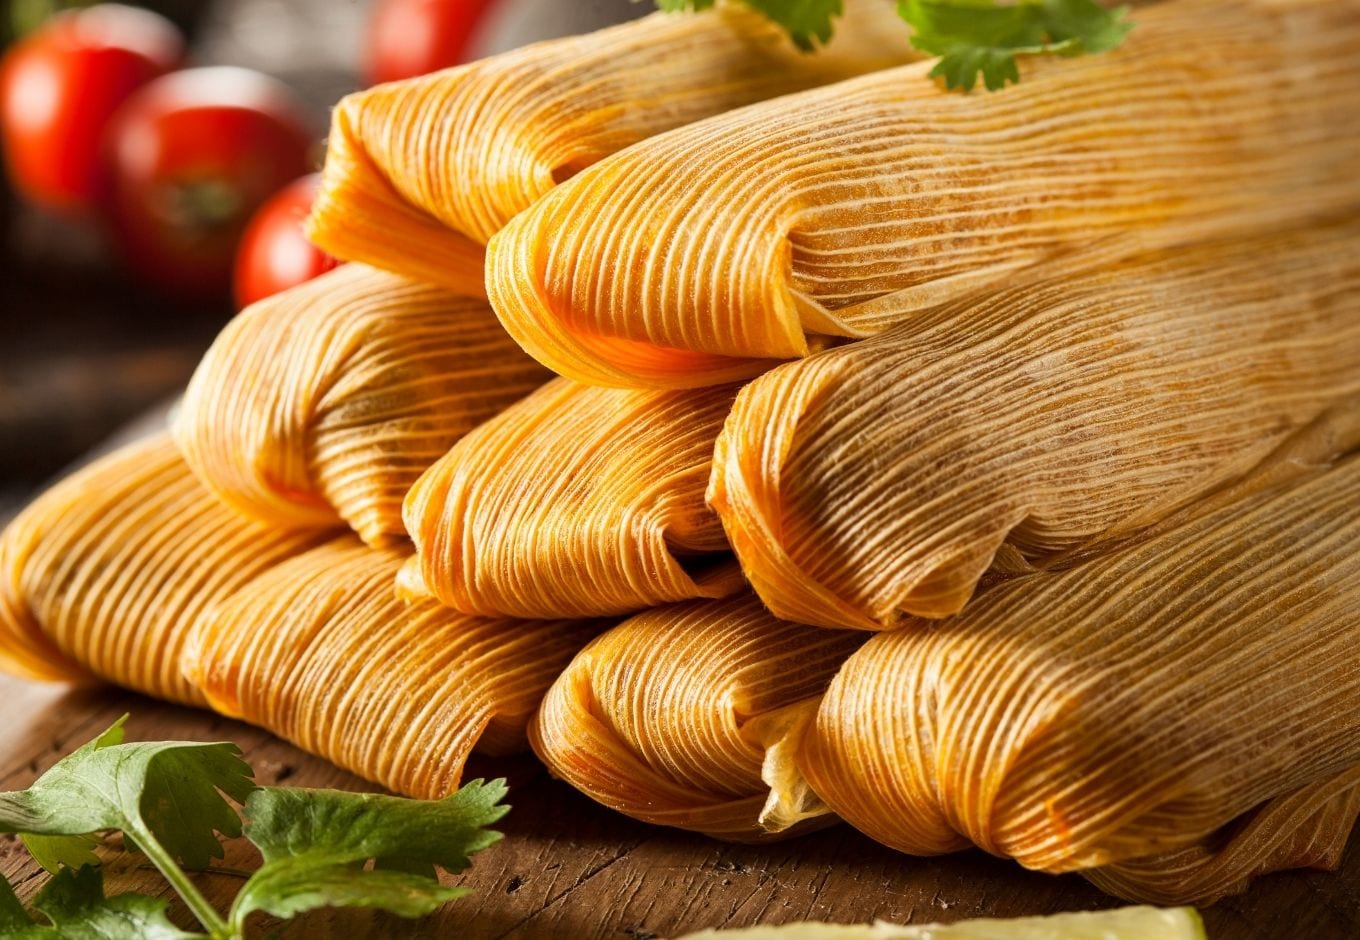 A pile of Mexican tamales.